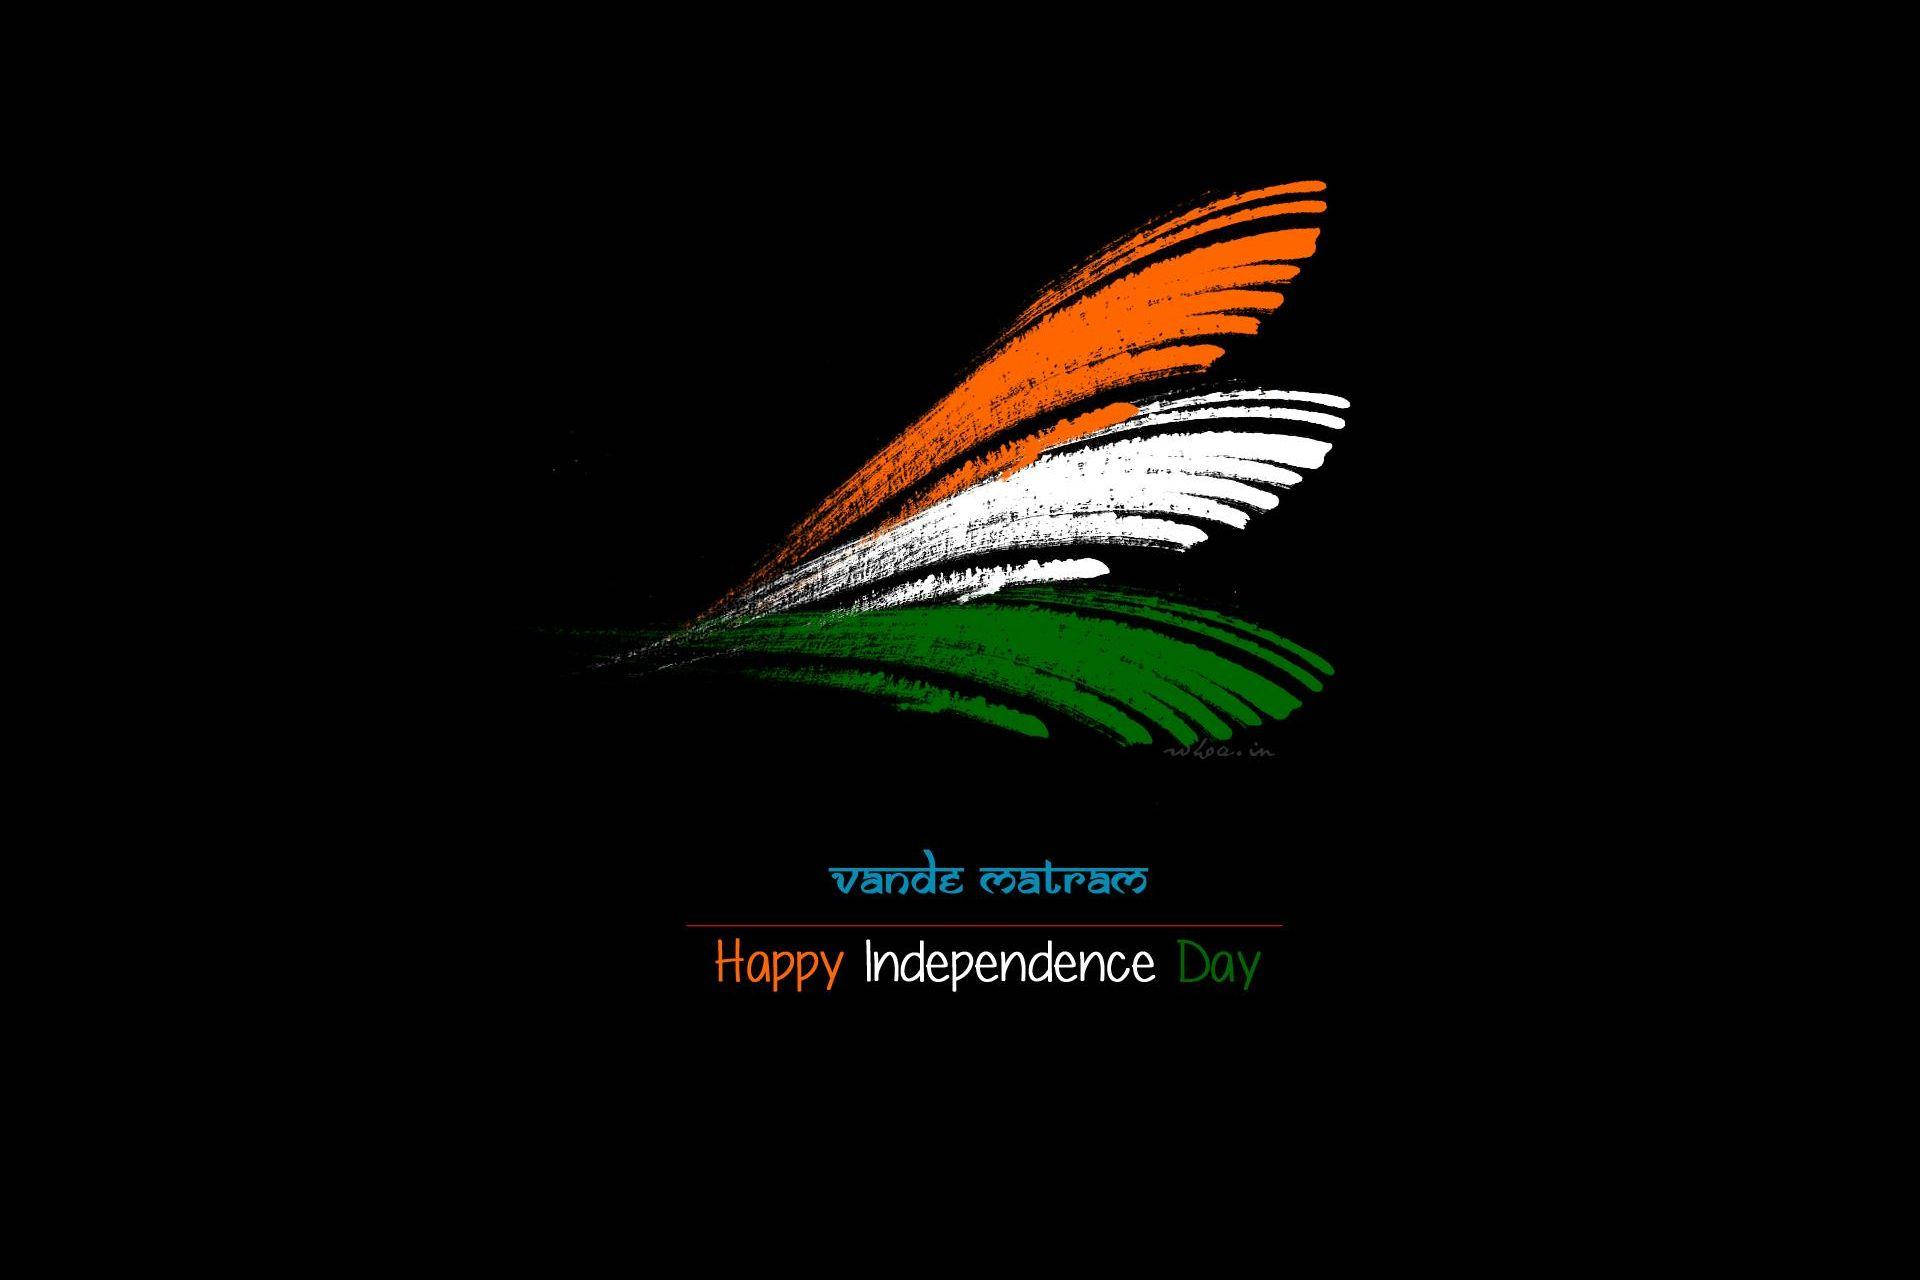 15 August Wallpaper and Images, Free Download Independence Day Wallpapers